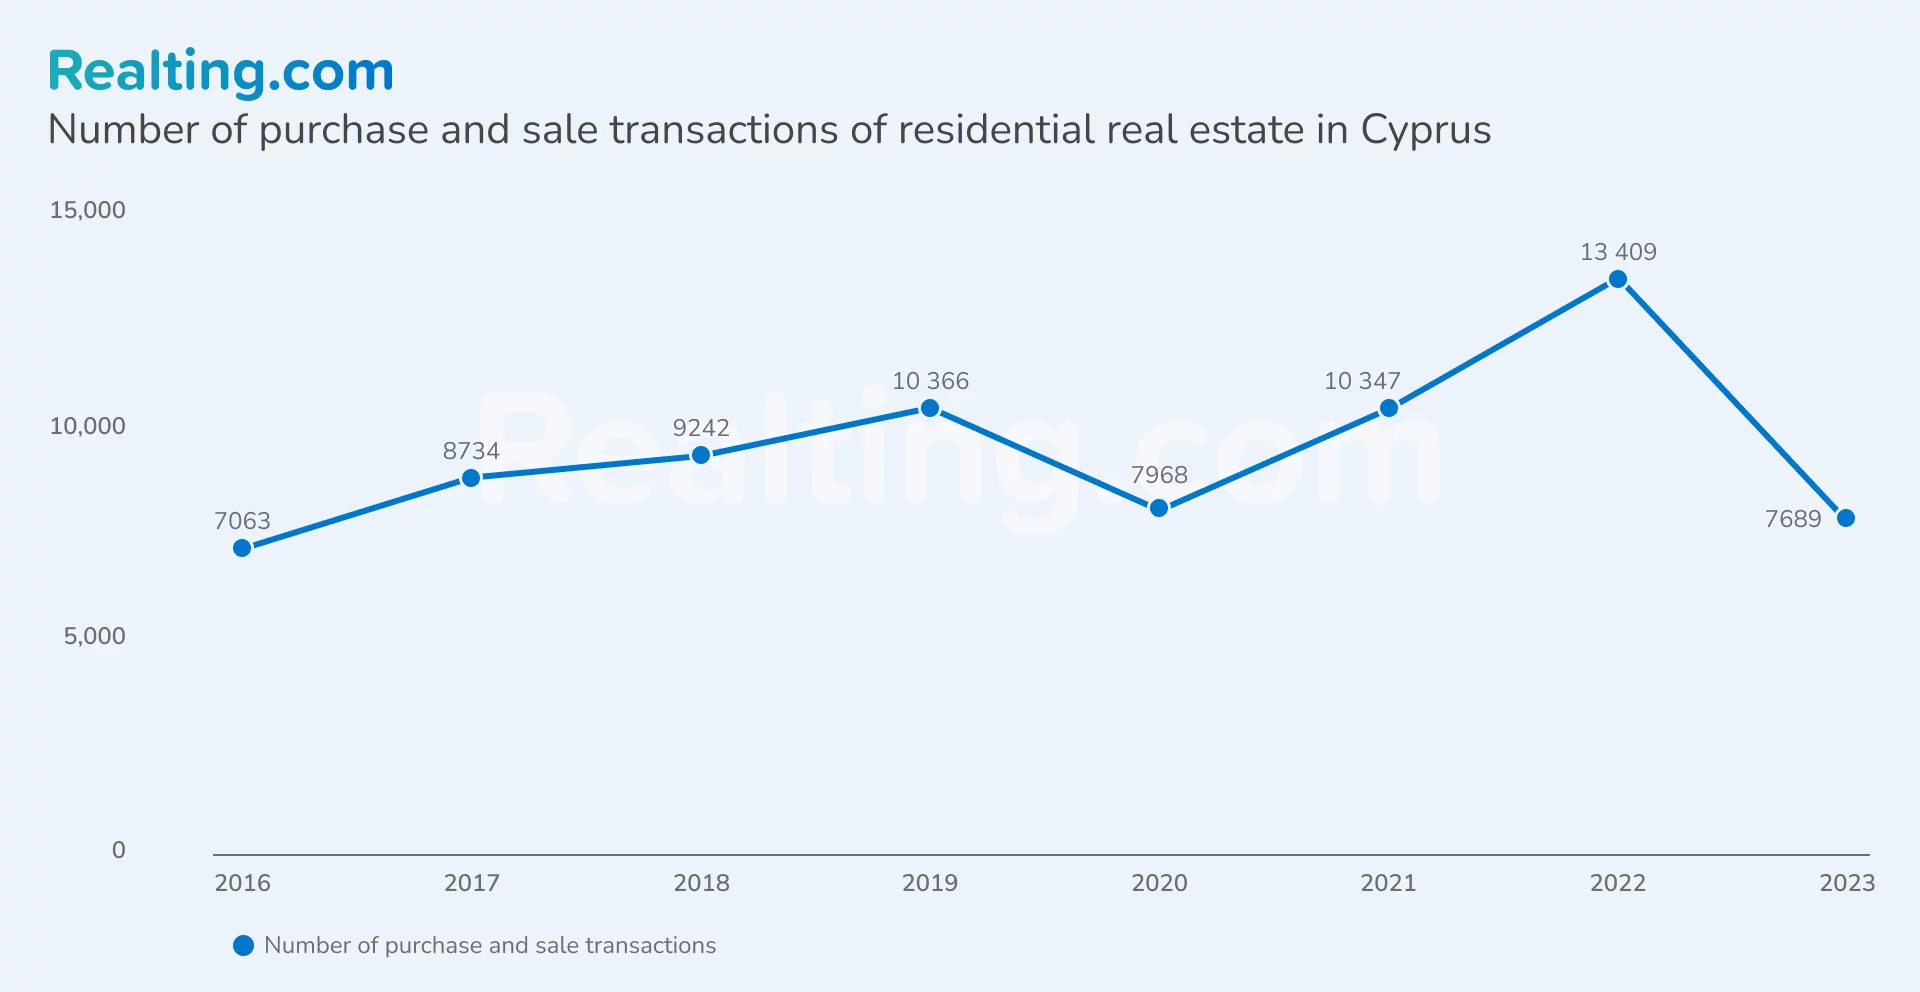 Number of purchase and sale transactions of residential real estate in Cyprus